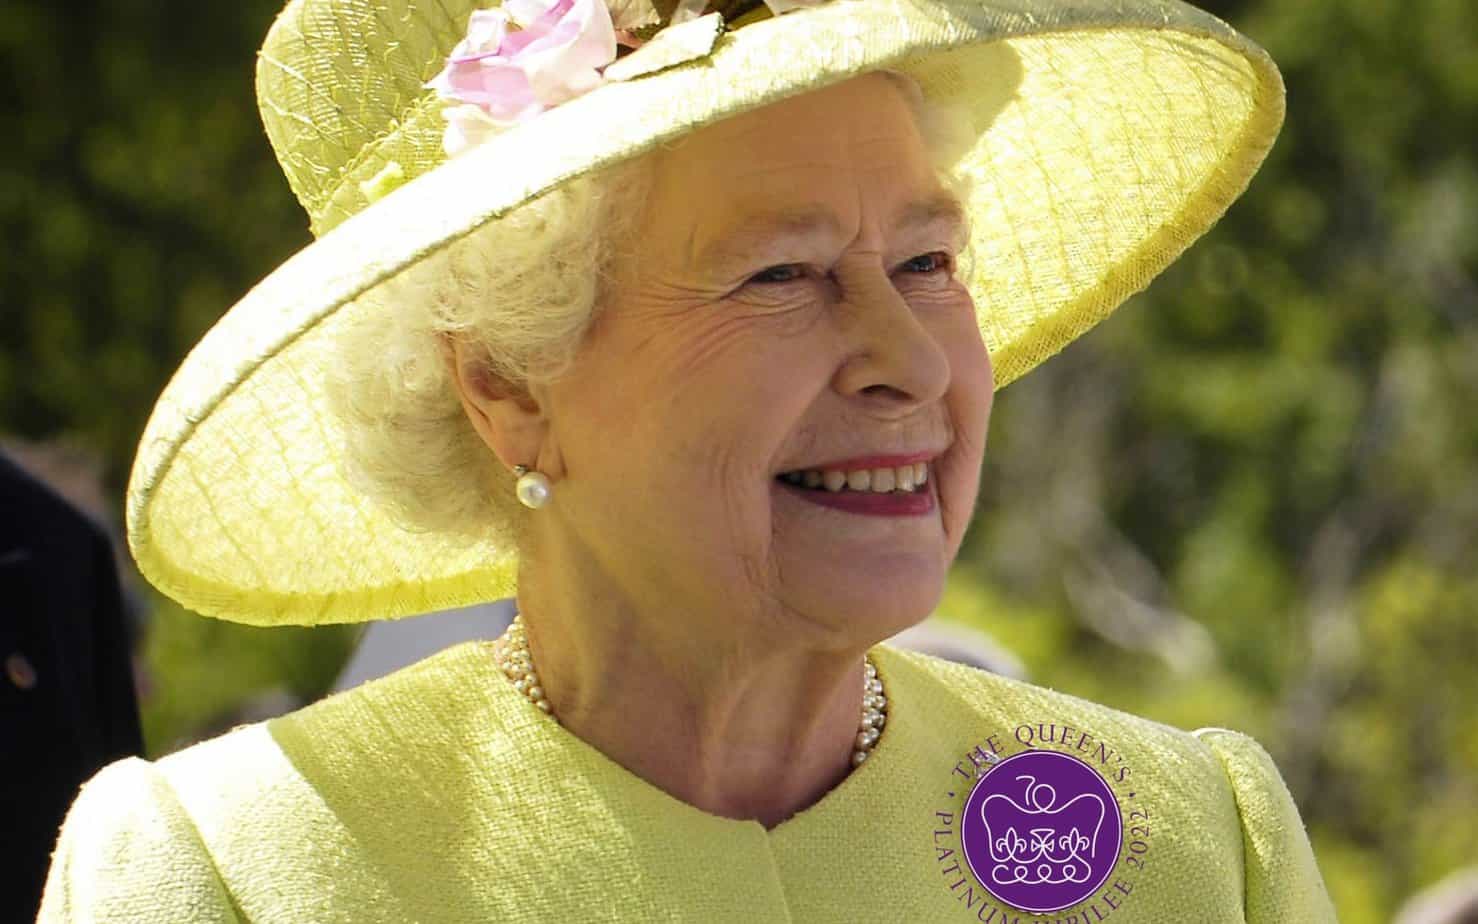 The significance of Queen Elizabeth 11 and her Platinum Jubilee to Christians Worldwide